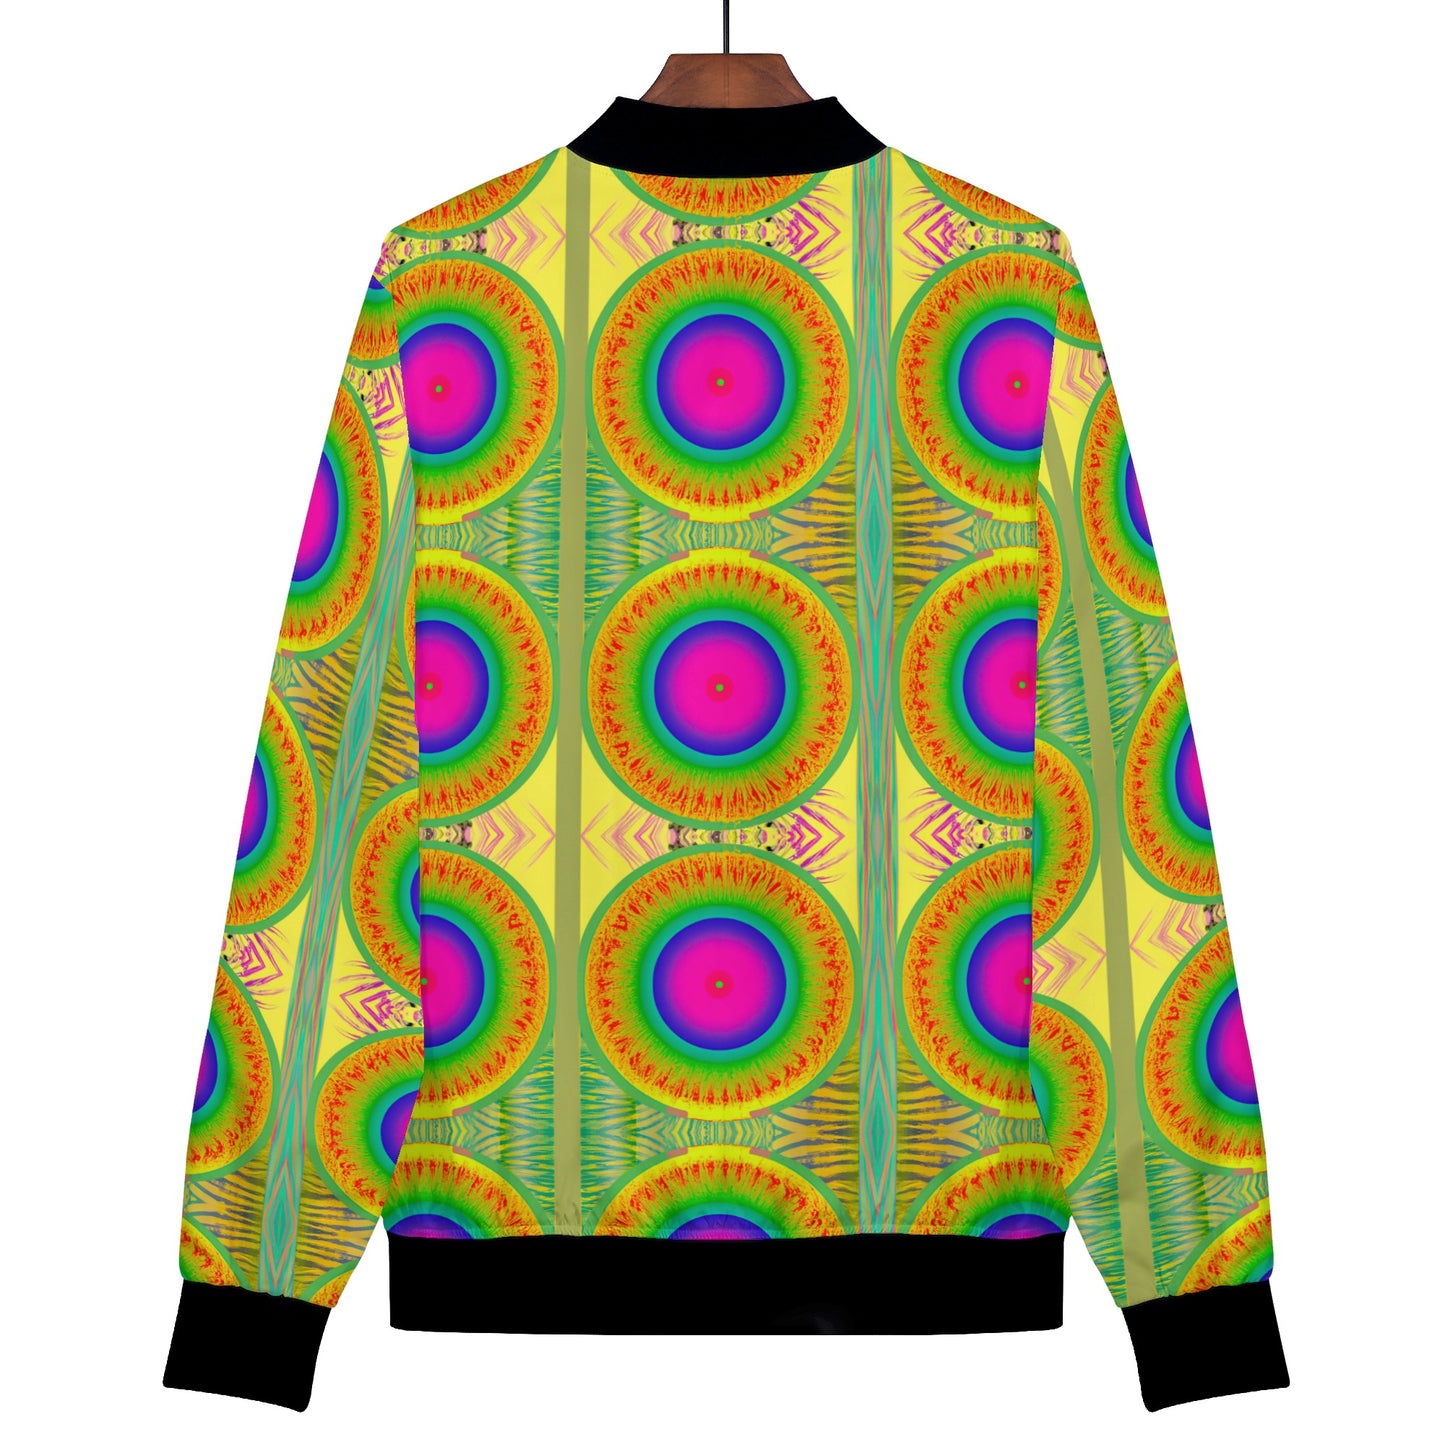 The unique and super bright psychedelia dimension neon burn pattern covers the entire garment, ensuring that you stand out in any crowd. Crafted with attention to detail, this jacket combines fashion and comfort for a confident and stylish look. Step out in this cool jacket and get ready to turn heads wherever you go.